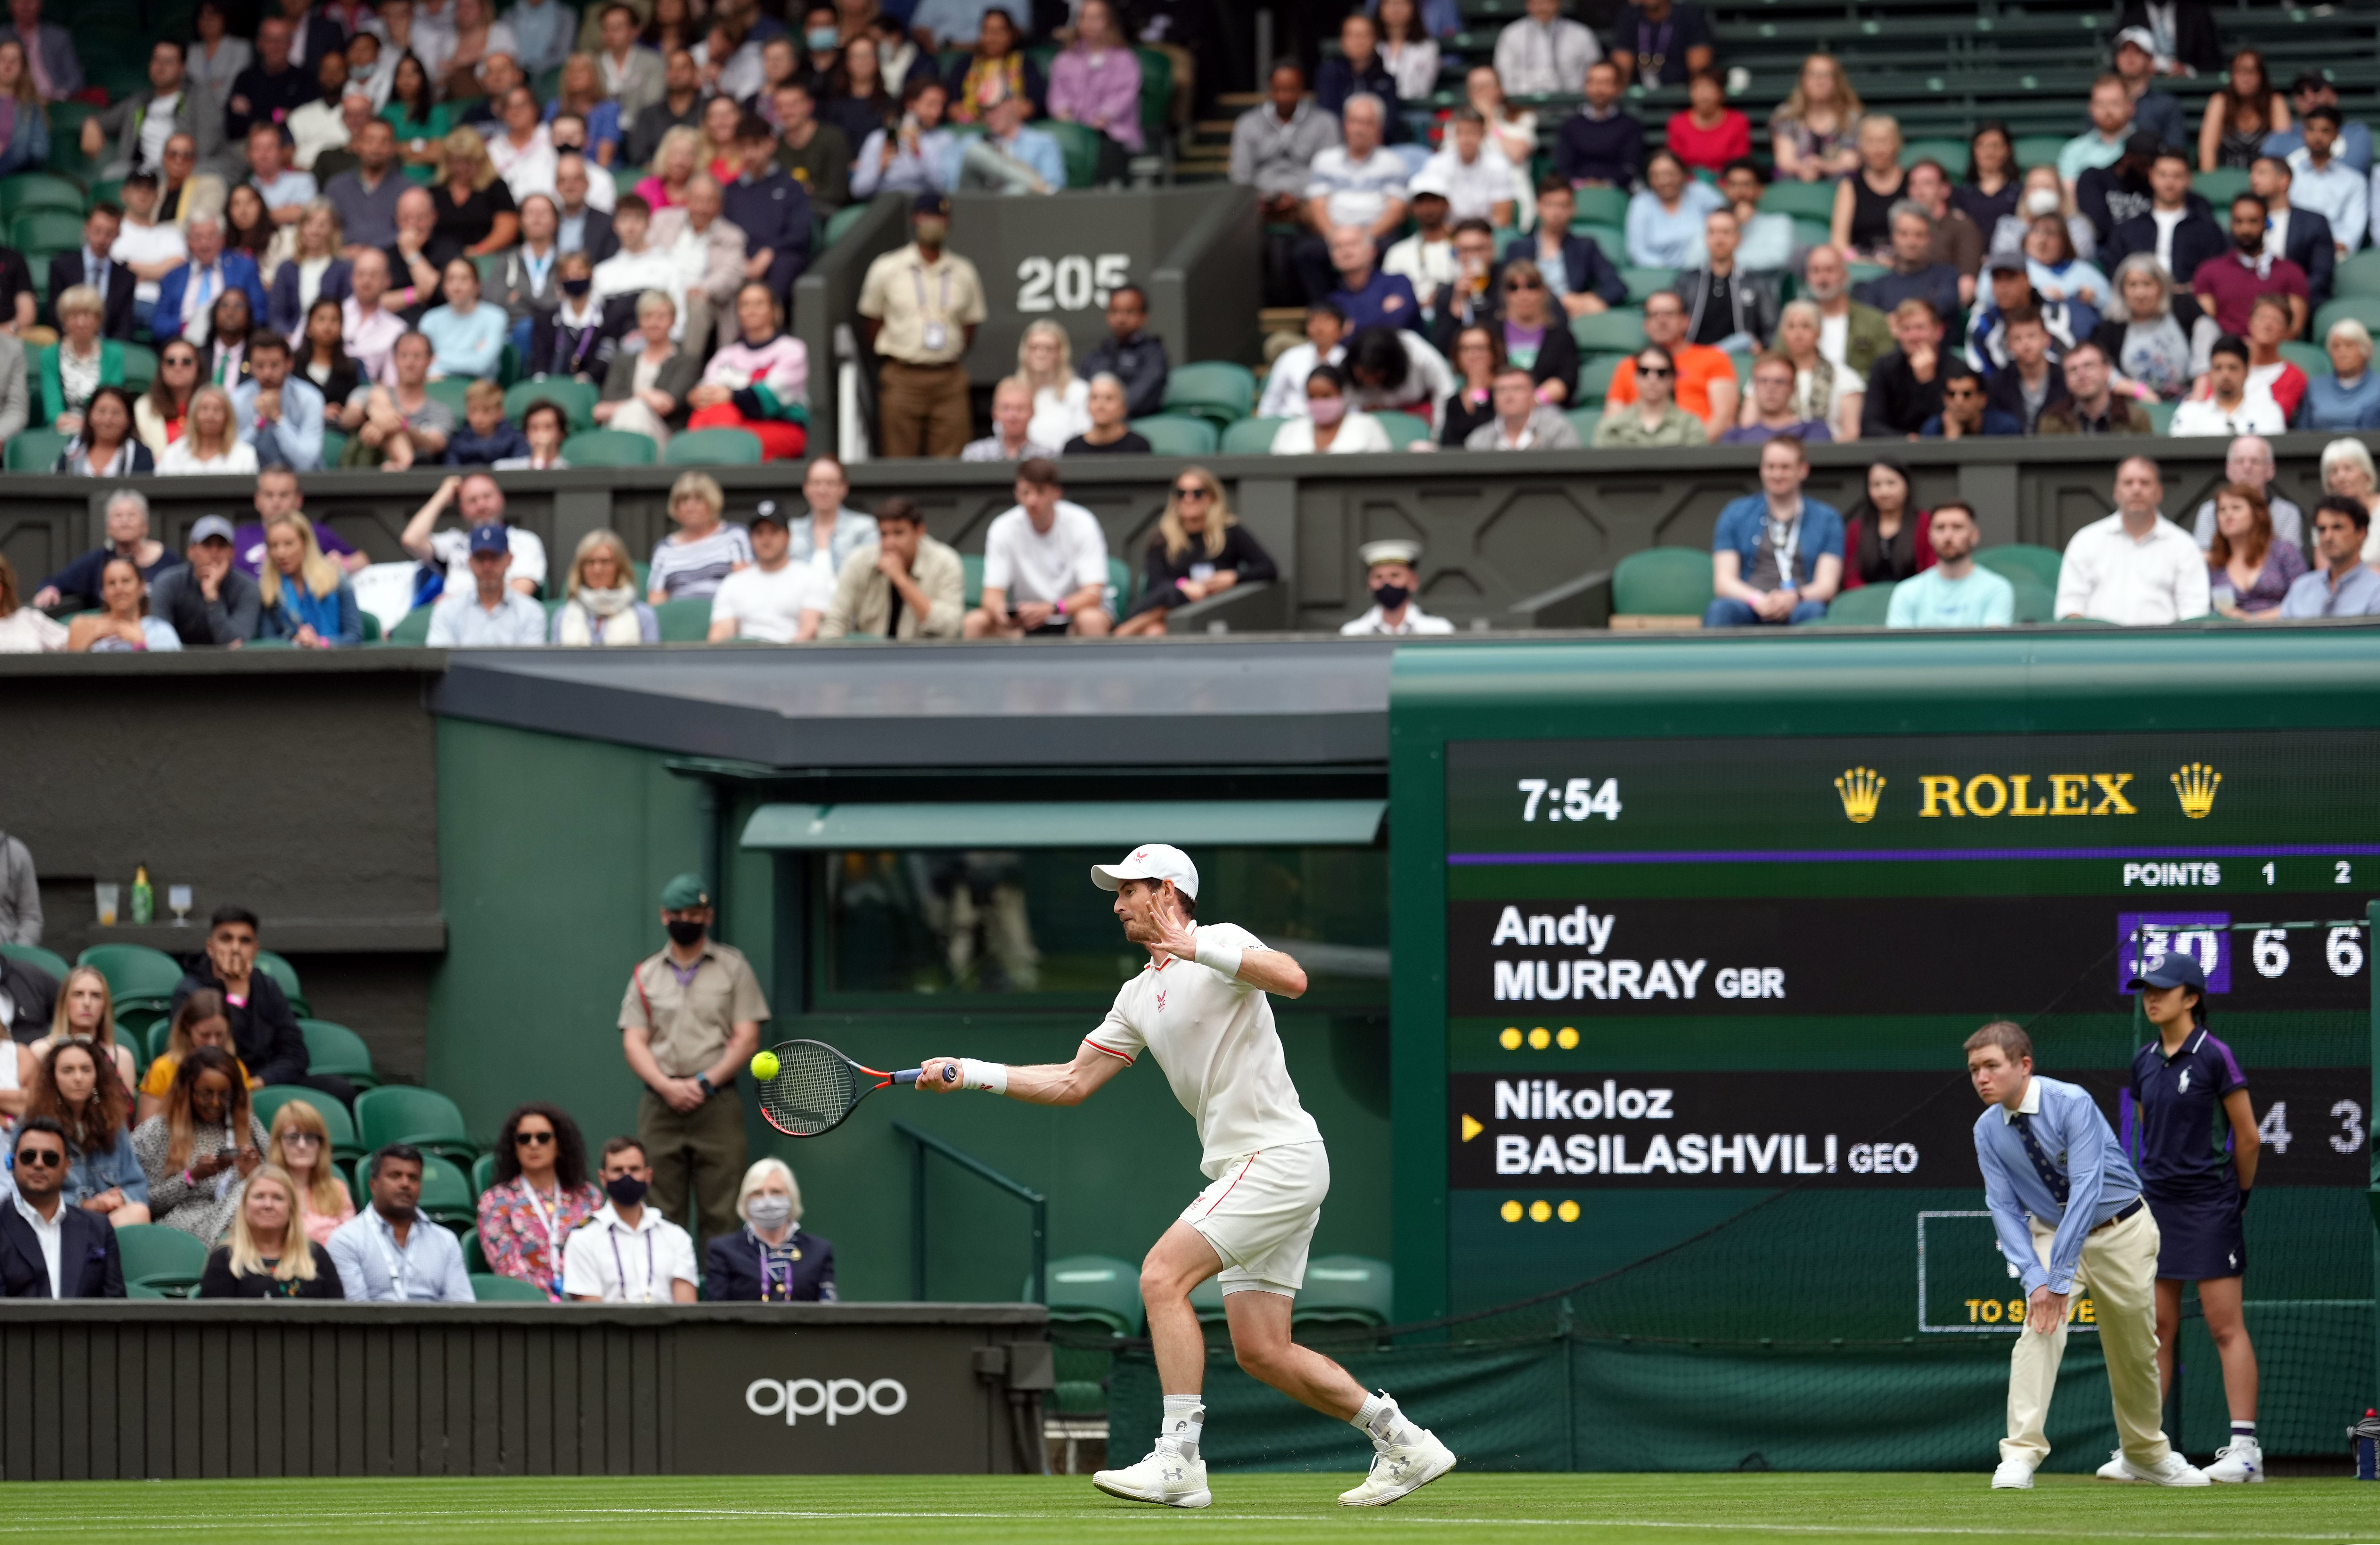 Andy Murray was back playing a singles match on Centre Court at Wimbledon for the first time since 2017